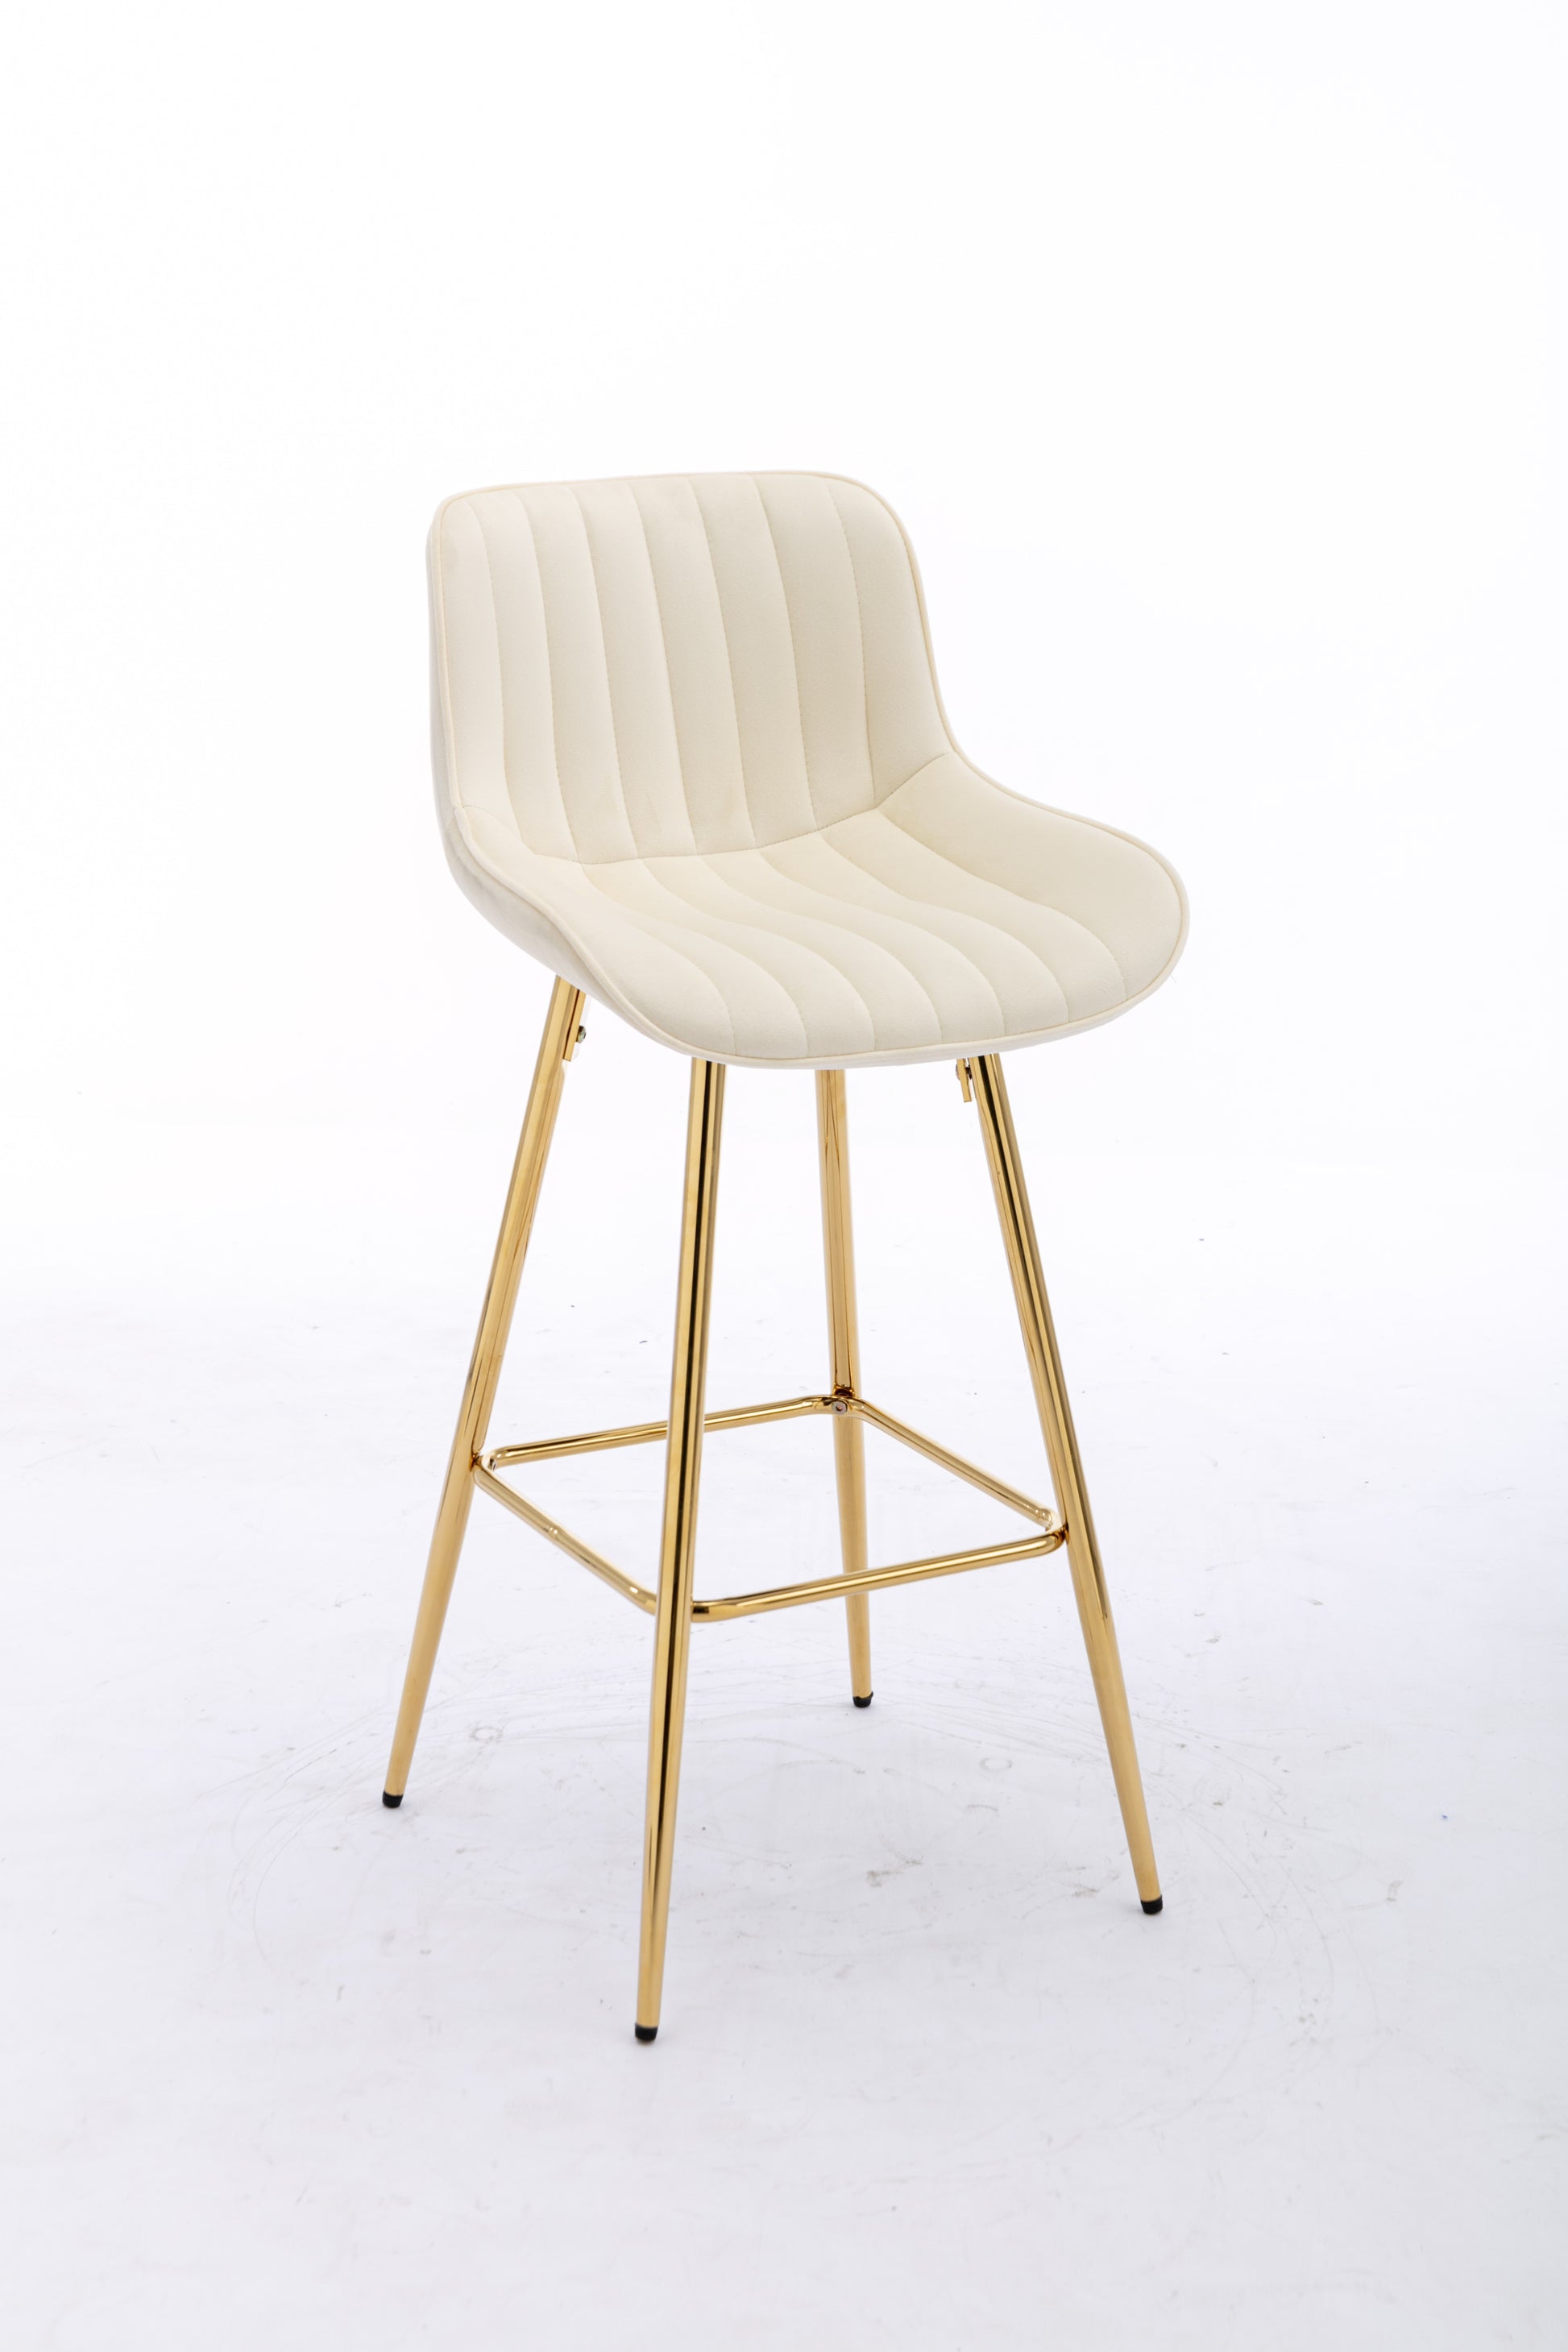 26 Inch Set of 2 Bar Stools,with Chrome Footrest Velvet Fabric Counter Stool Golden Leg Simple Bar Stool,CREAM - Enova Luxe Home Store